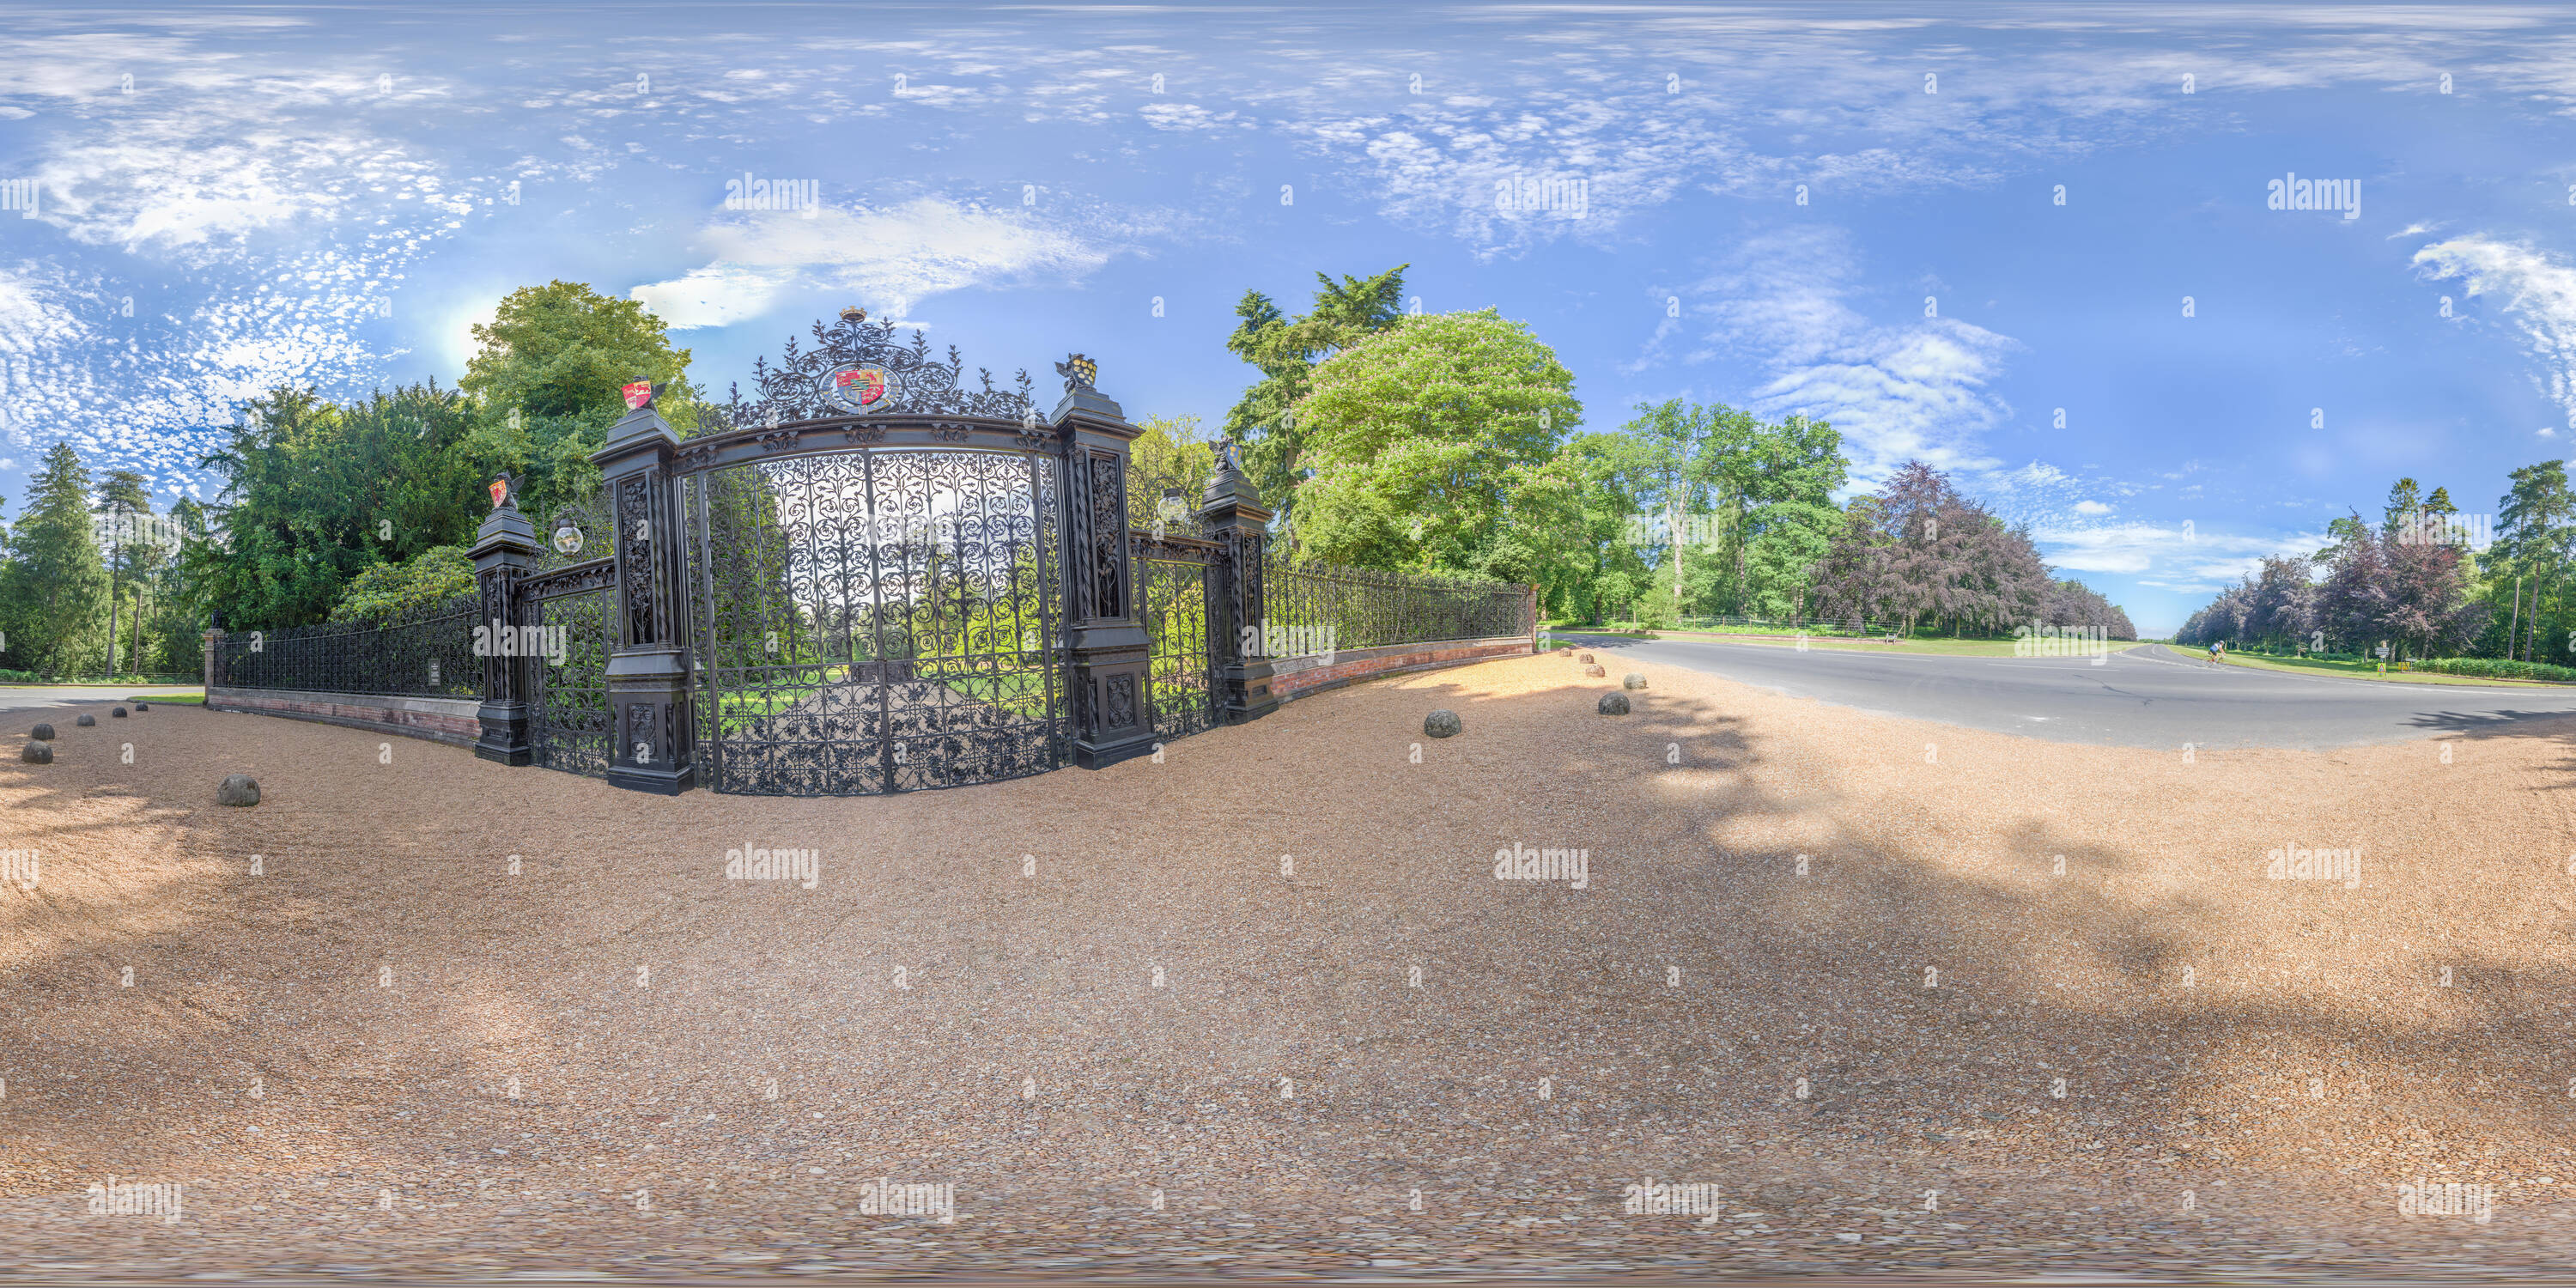 360 degree panoramic view of Main gate entrance to the royal home at Sandringham in the grounds of Sandringham park, Norfolk, on a sunny summer day.